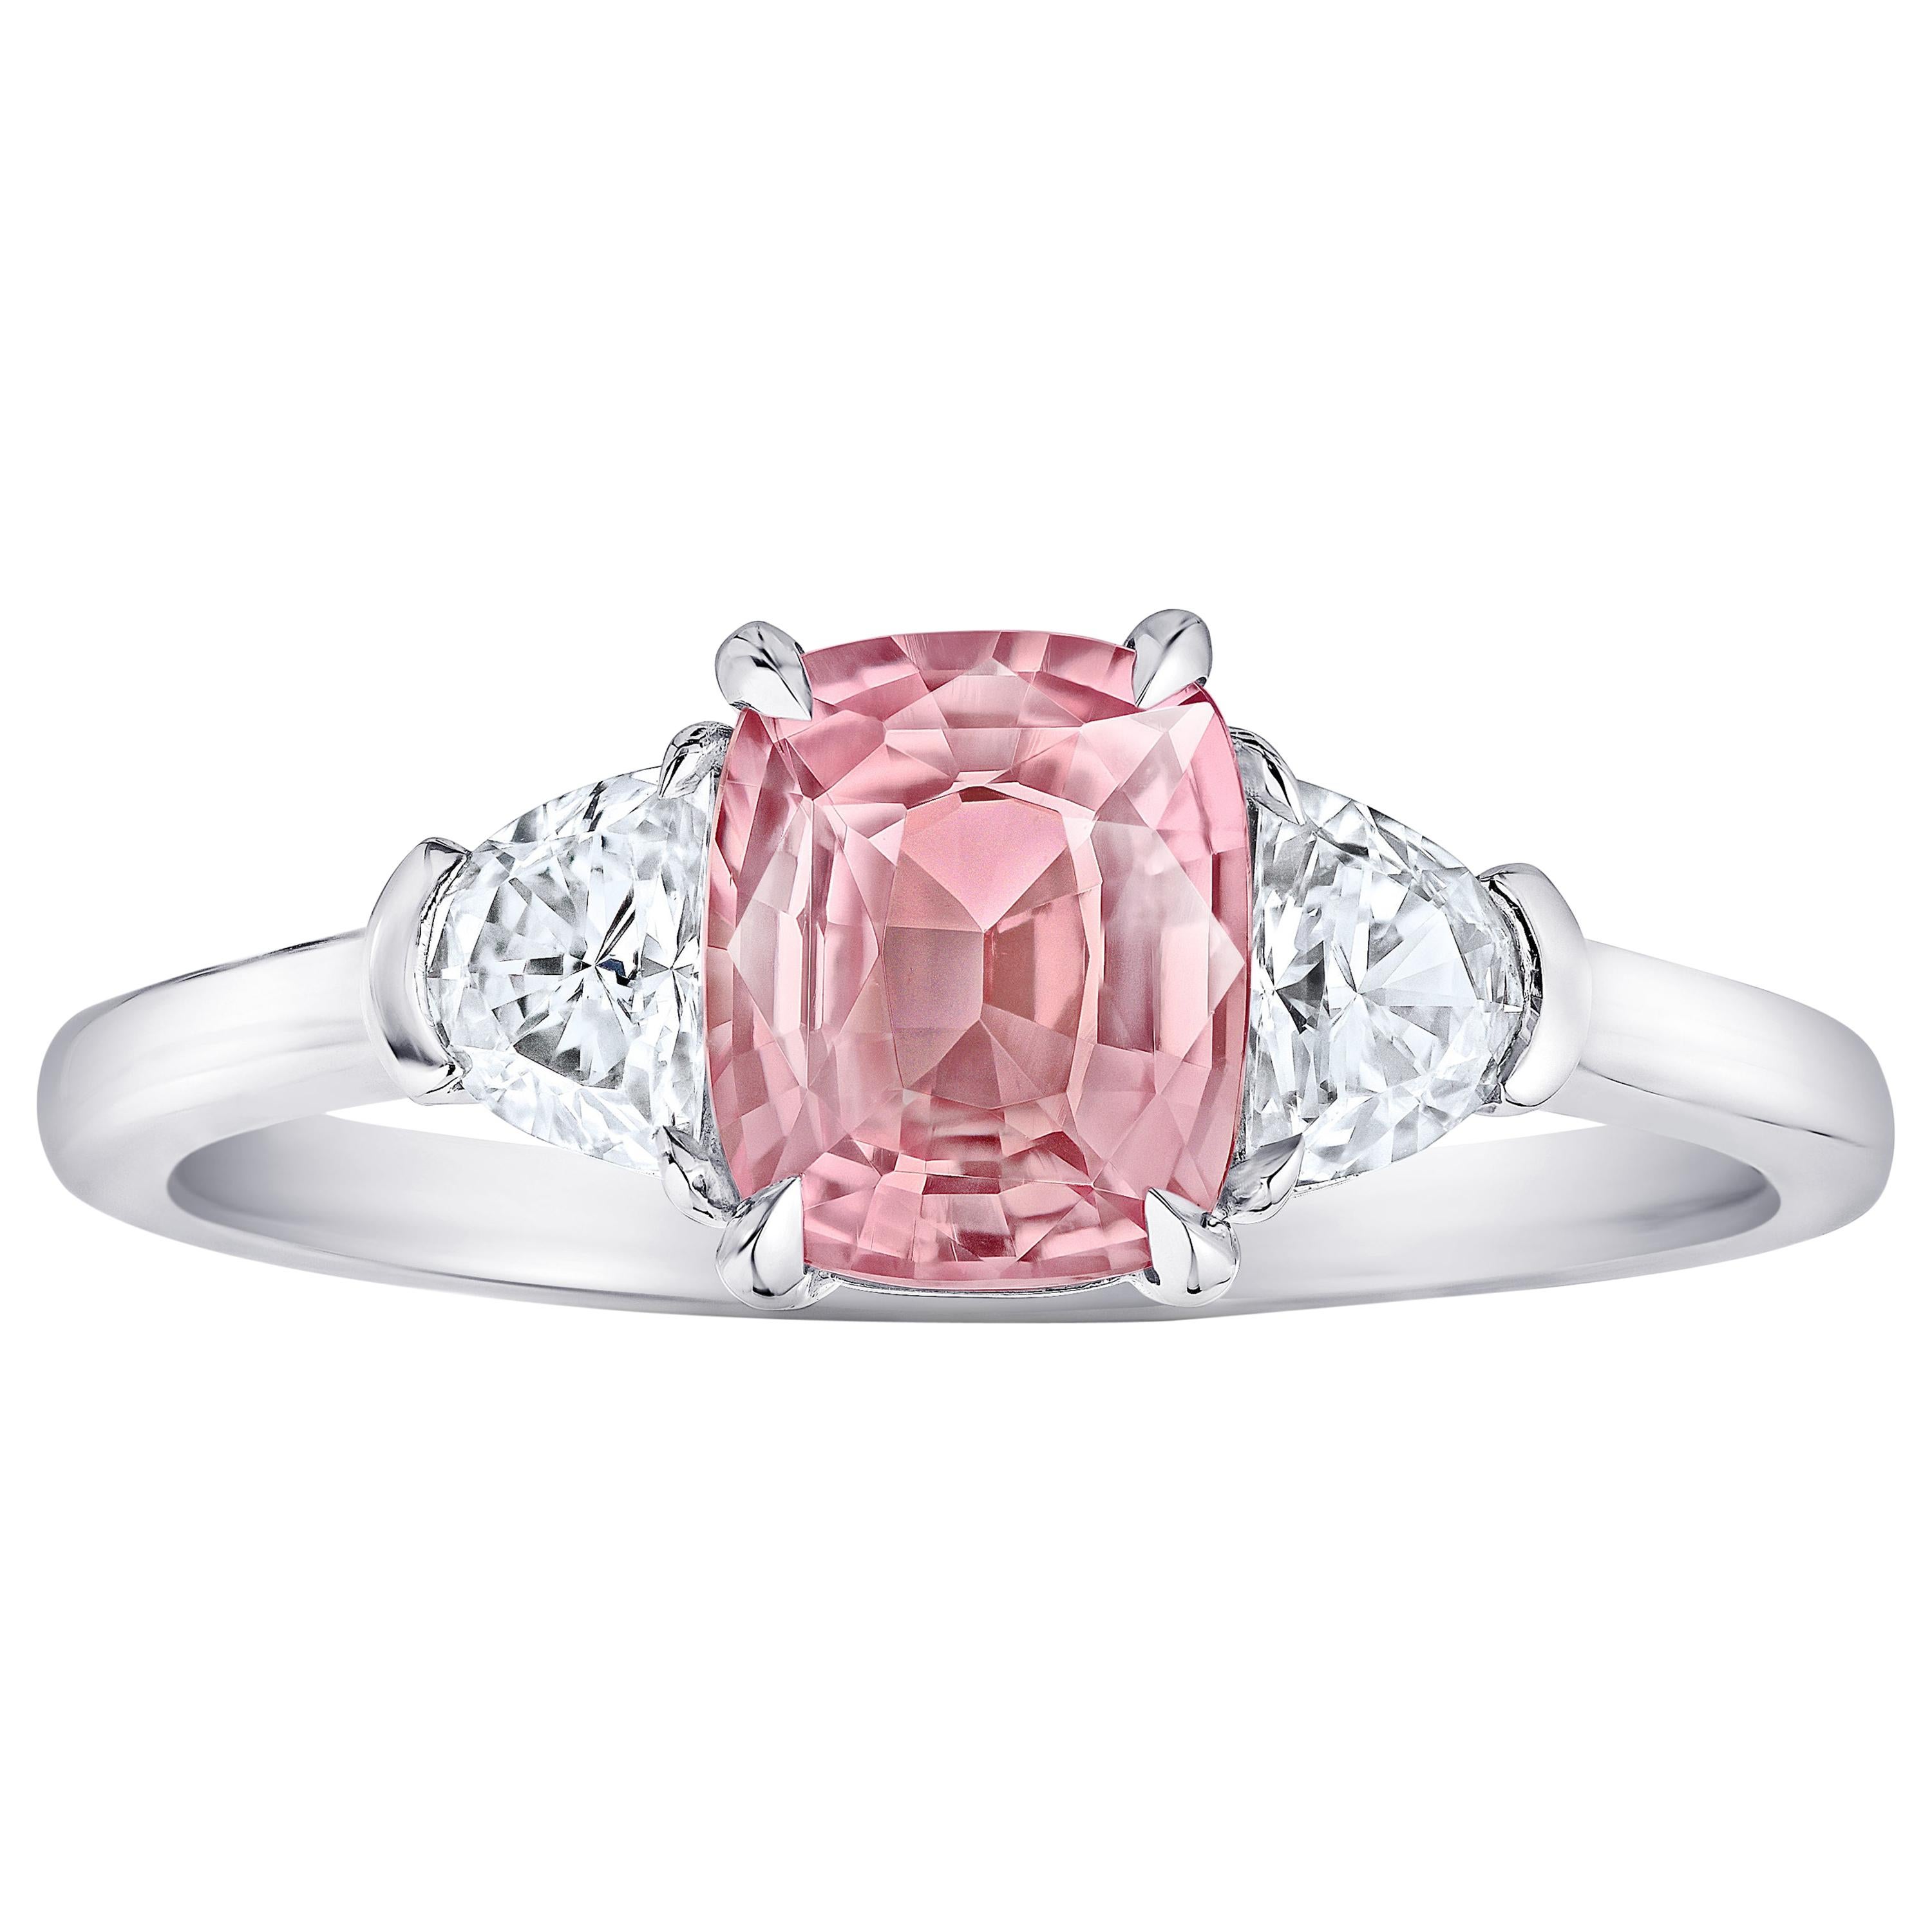 1.29 Carat Cushion Padparadscha Sapphire and Diamond Ring For Sale